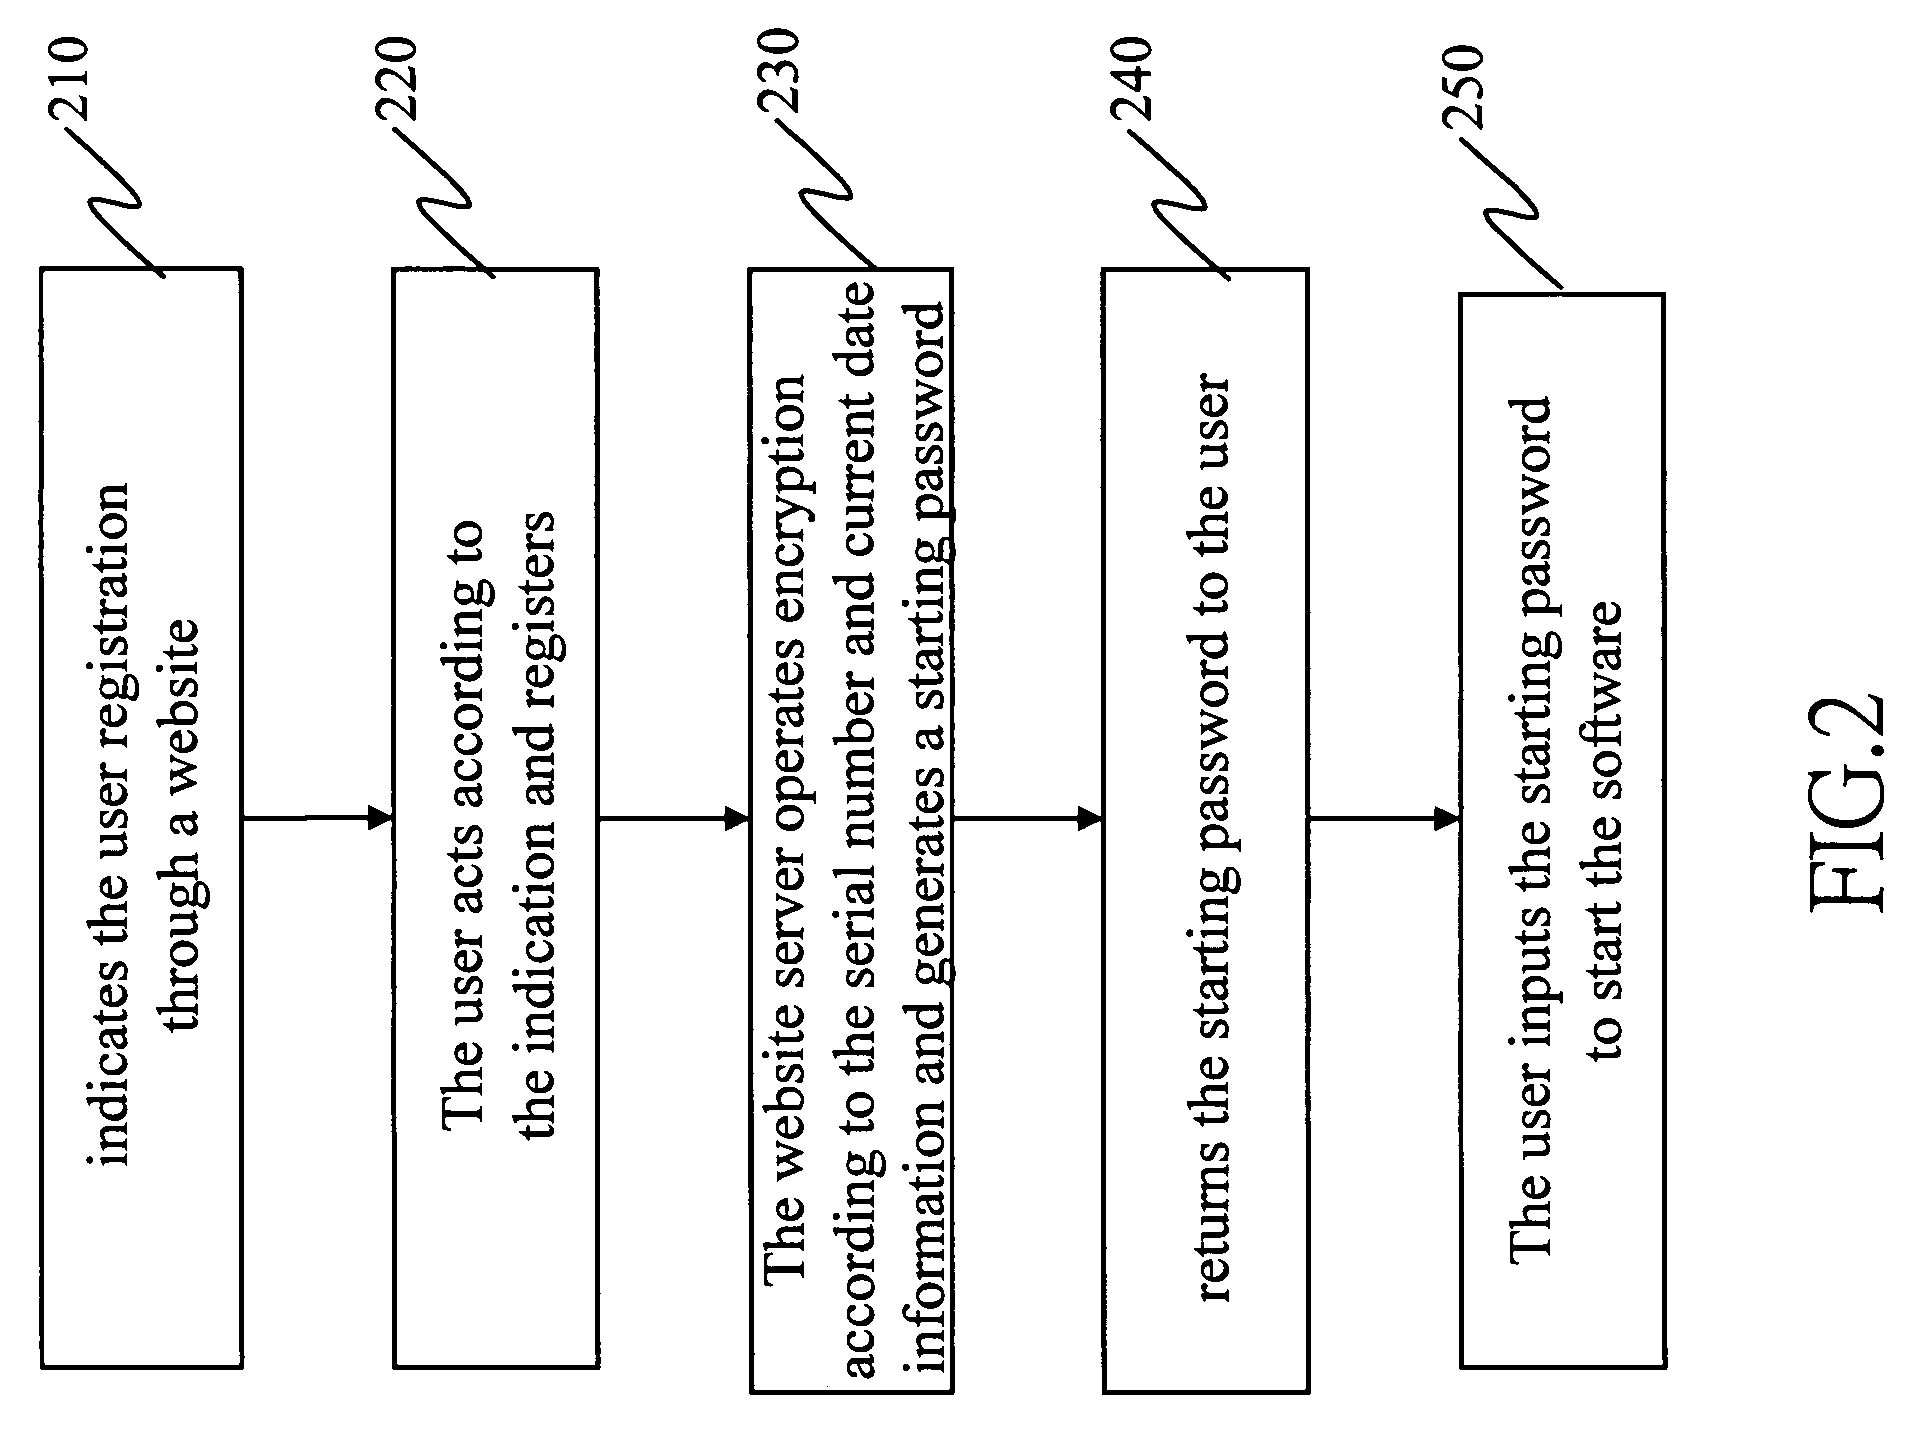 Encryption method of application software